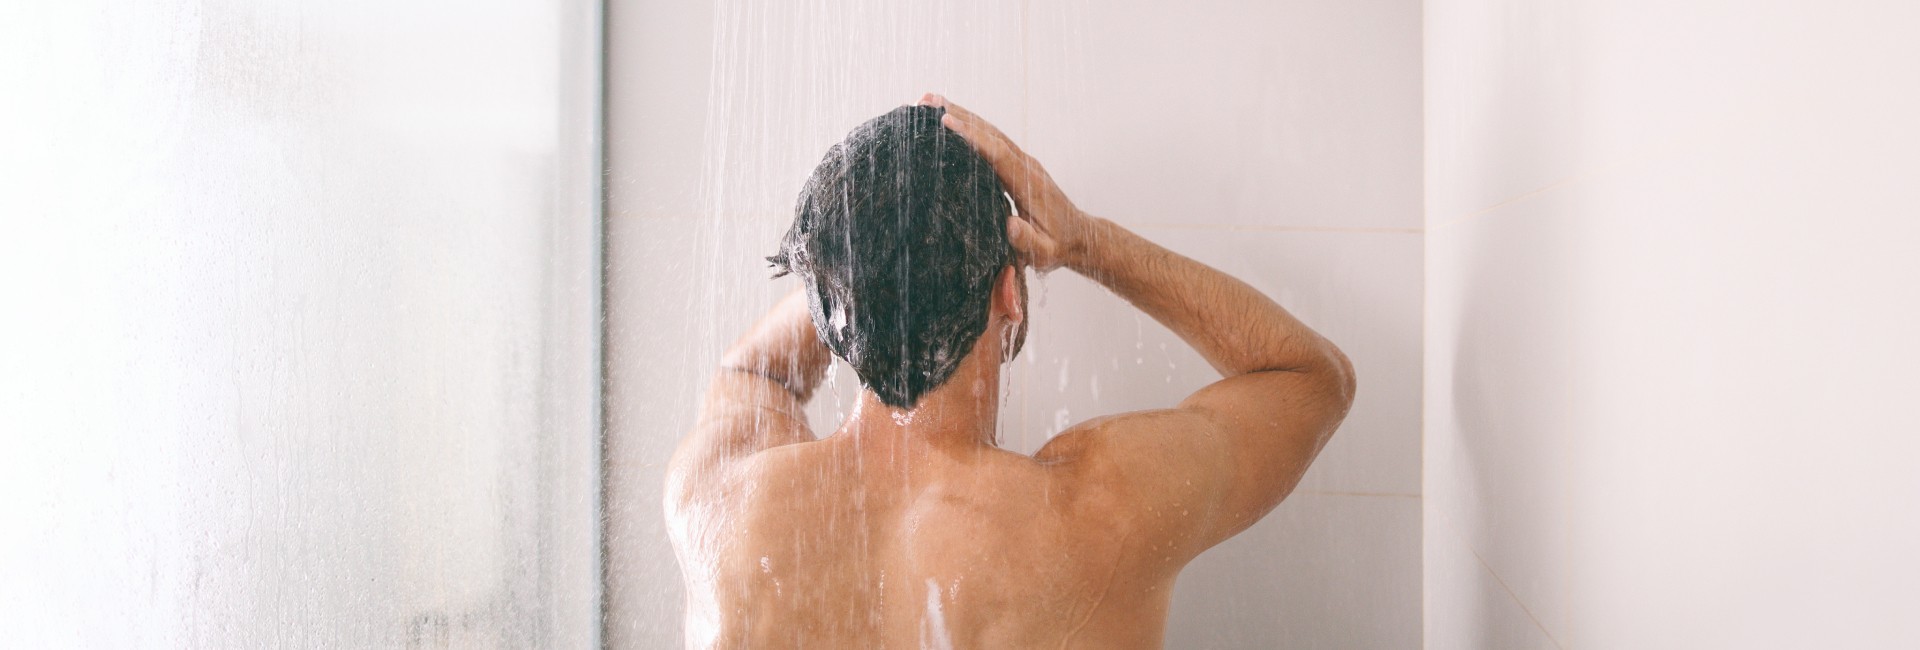 Are There Any Benefits to Having a Cold Shower After a Workout?